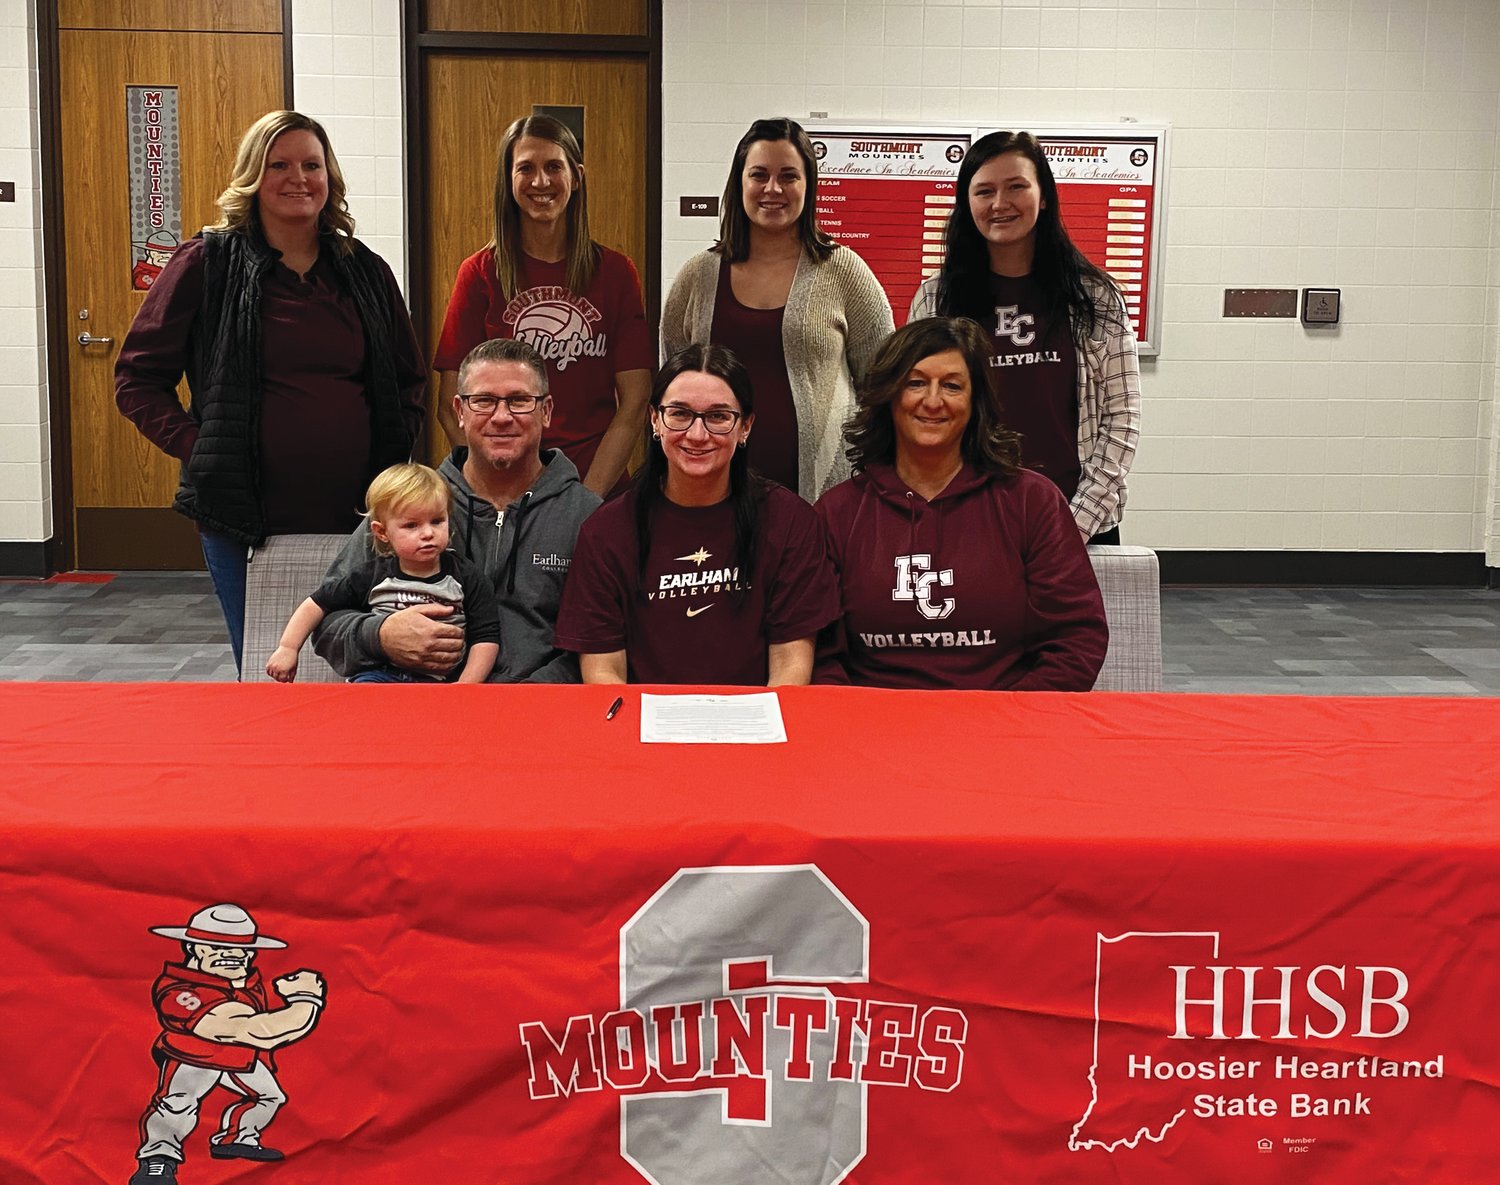 Southmont’s Kaley Remley will continue her academic and volleyball career at Earlham College. She was joined by family Jeremy and Casey Phillips, Regan Remley, Tayler Pribble and Beckett, and Southmont coaches Lauran Nichols and Sarah Rhoads.